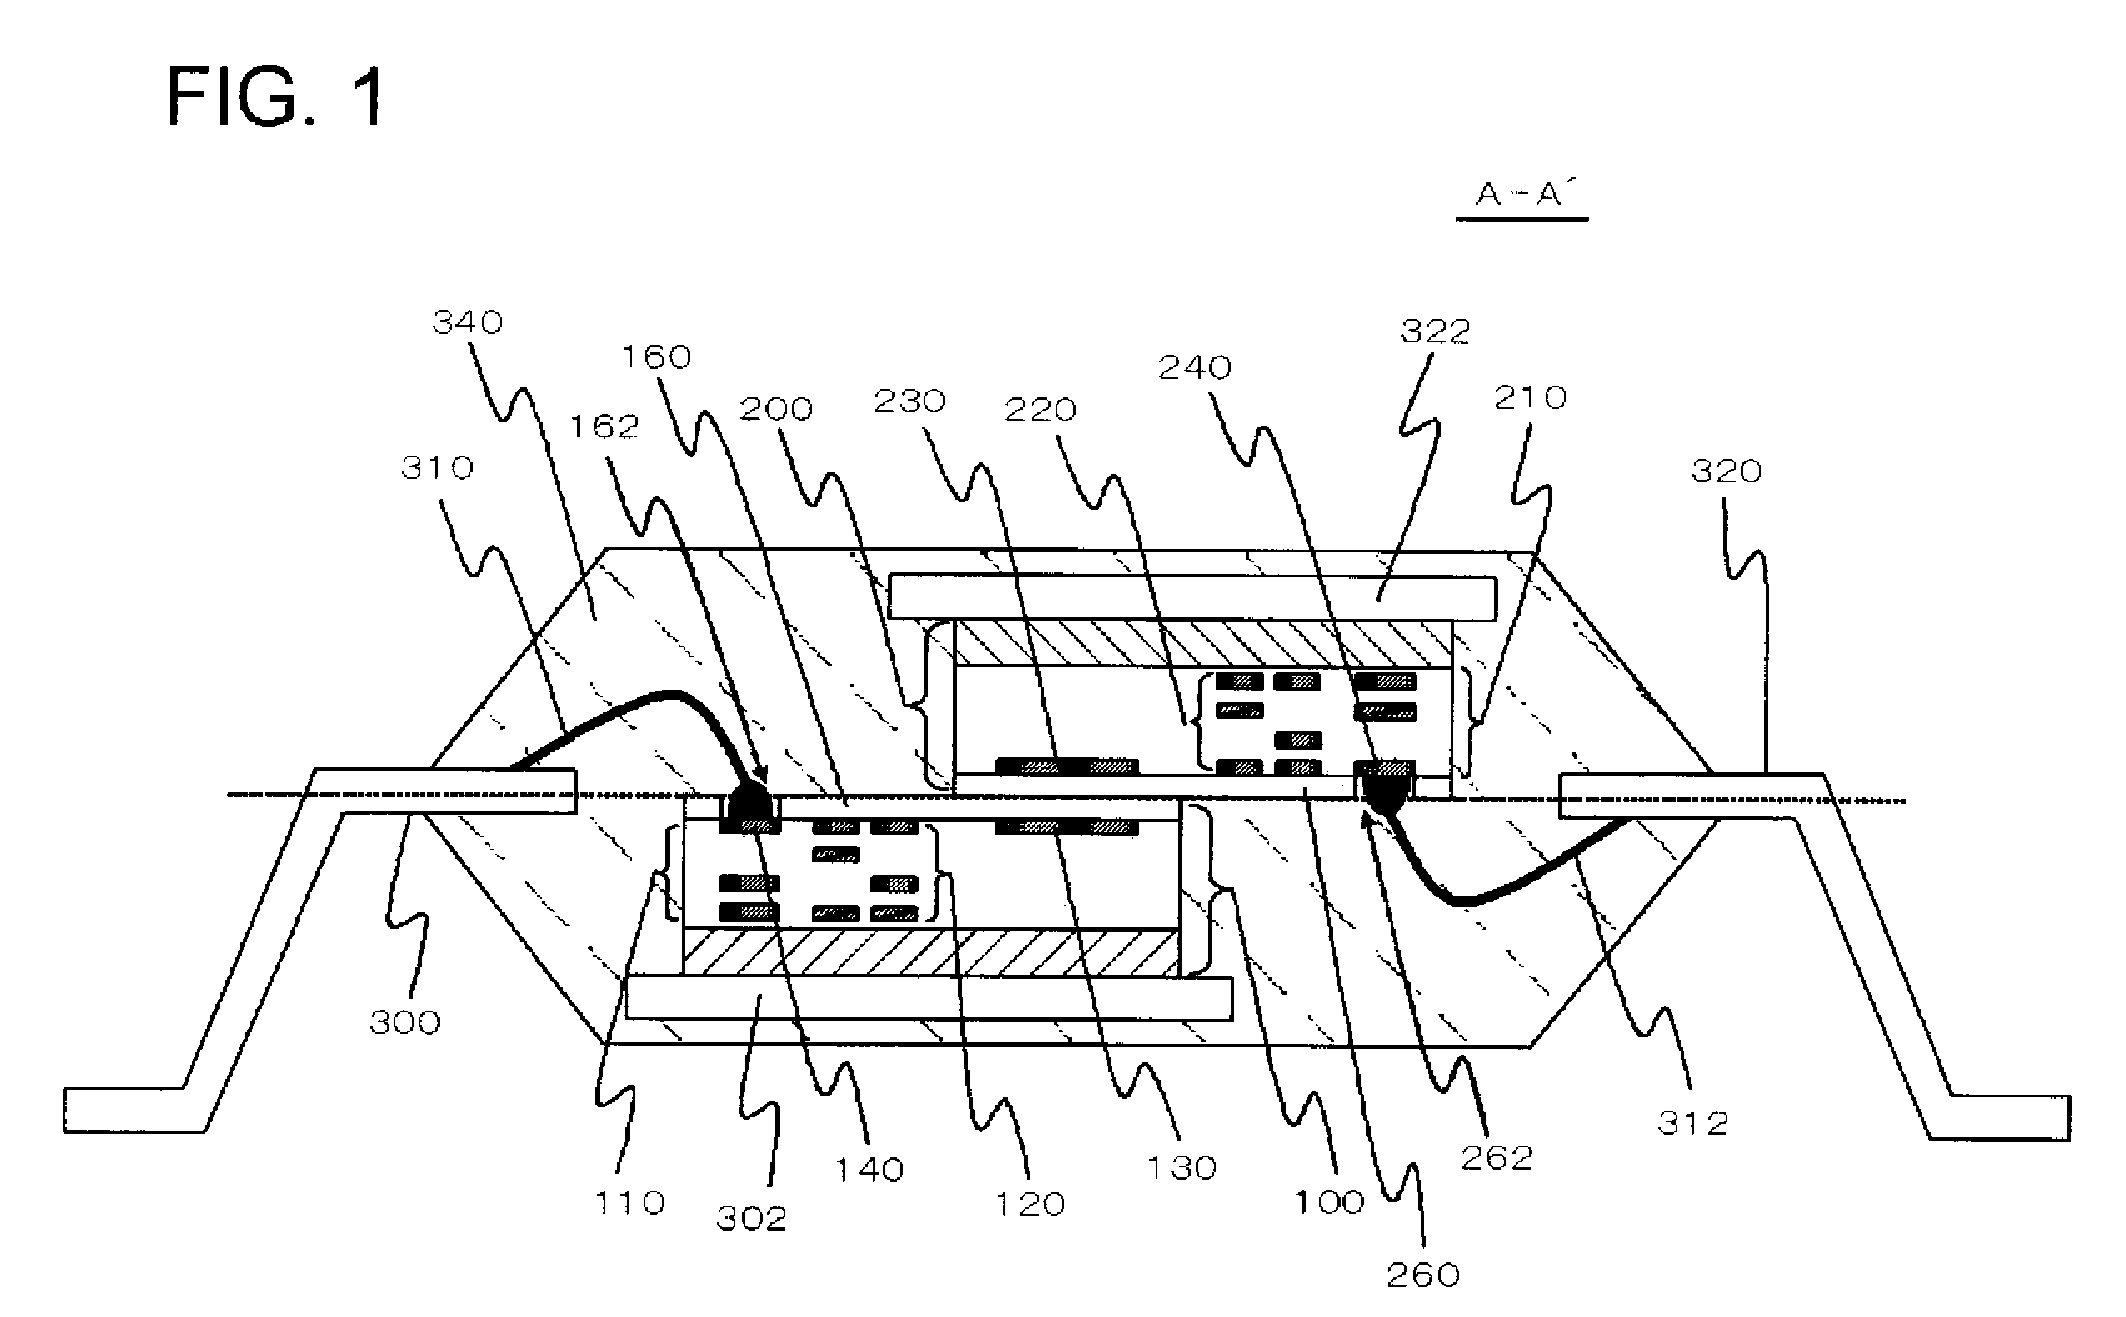 Semiconductor device that performs signal transmission using induction coupling, method of said manufacturing semiconductor device, and lead frame thereof